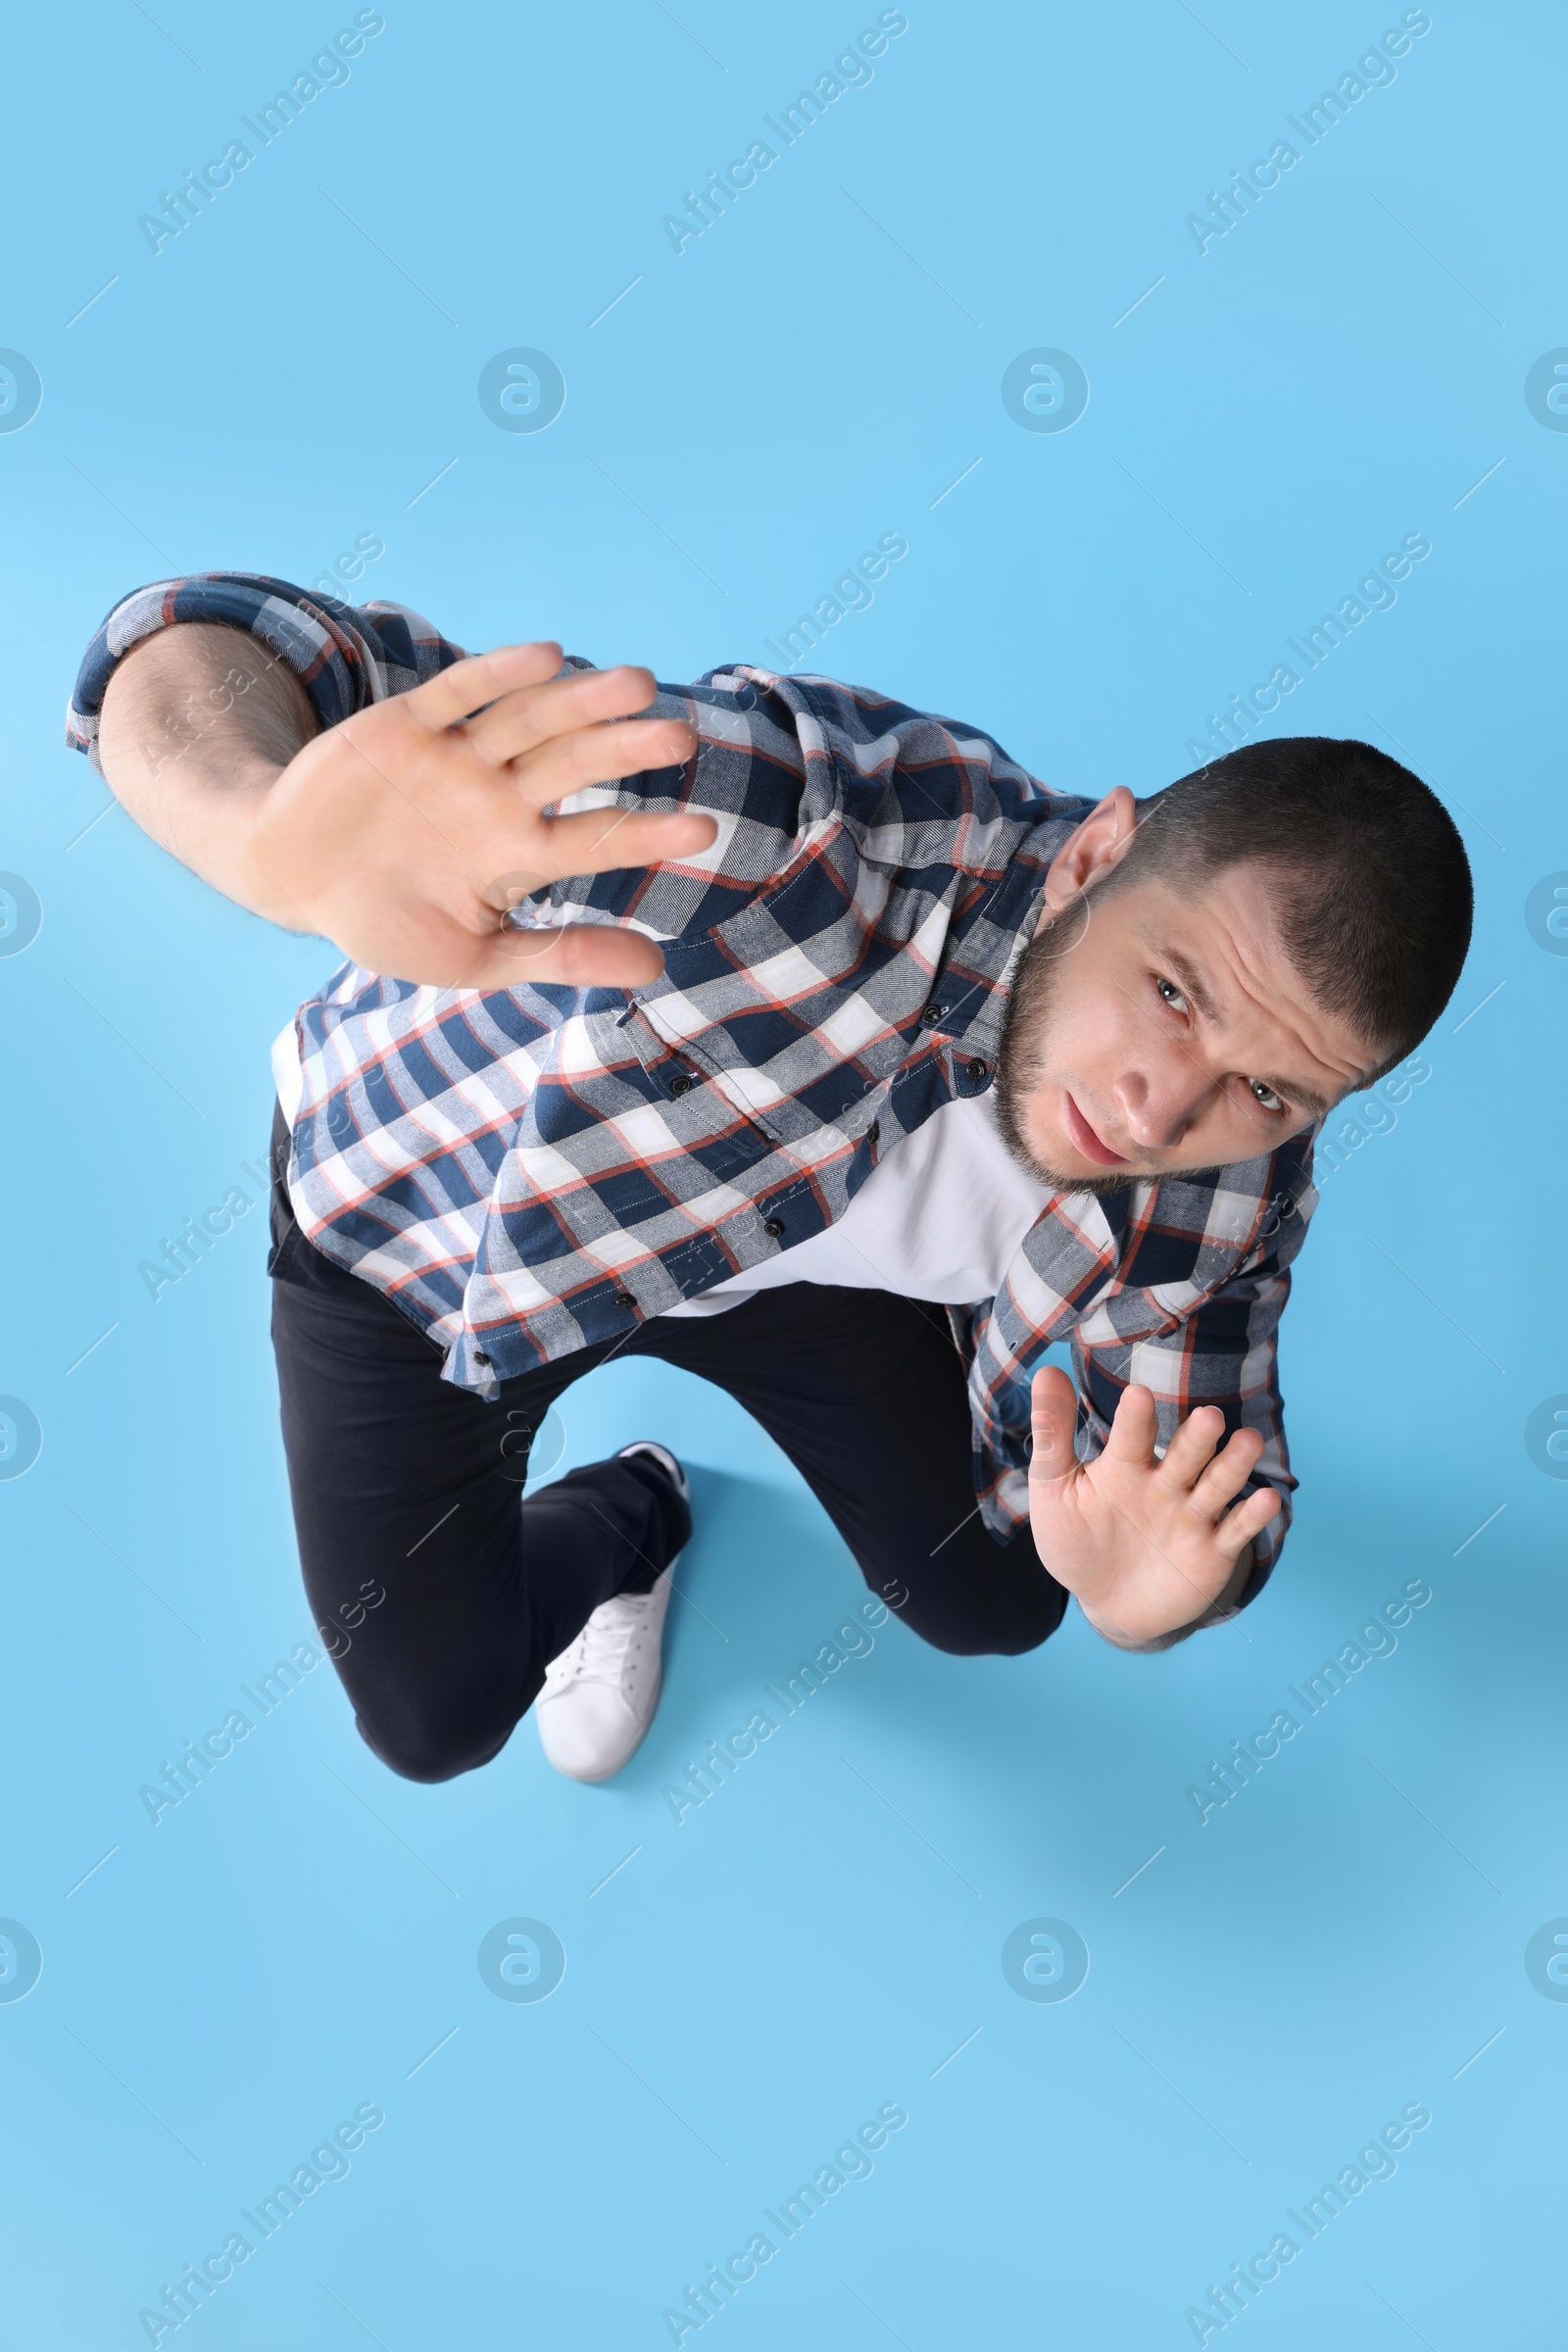 Photo of Man evading something on light blue background, above view